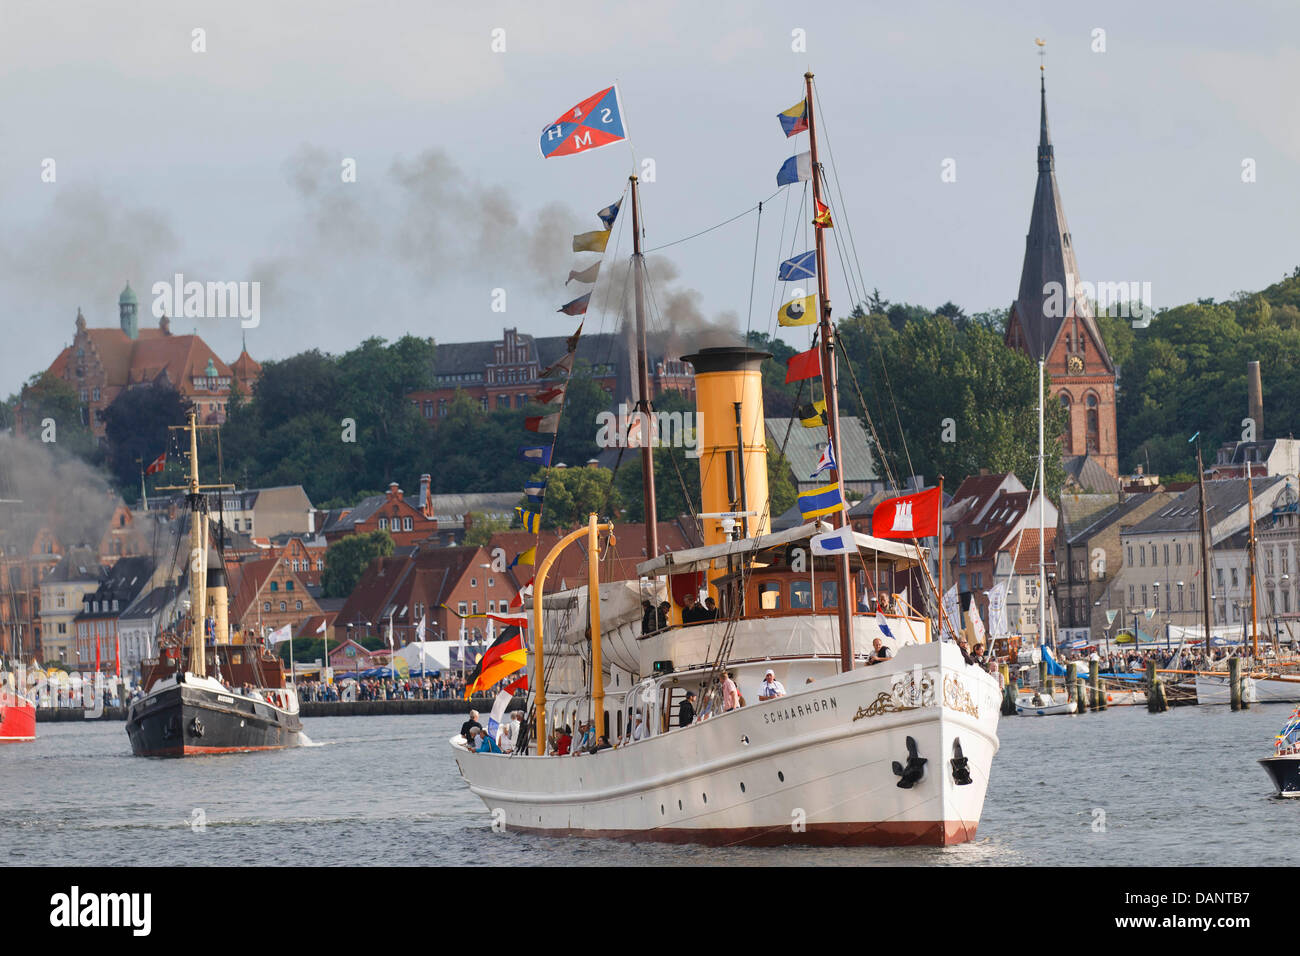 The Hamburg steamship 'Schaarhoern' puts out to sea during the traditional steamship race on the Flensburg Fjord in Flensburg, Germany, 08 July 2011. Along with many other steamships and other steam driven engines, the event 'Dampf Rundum' is the largest steamer spectacle in Europe, according to the event organizers. Photo: Markus Scholz Stock Photo